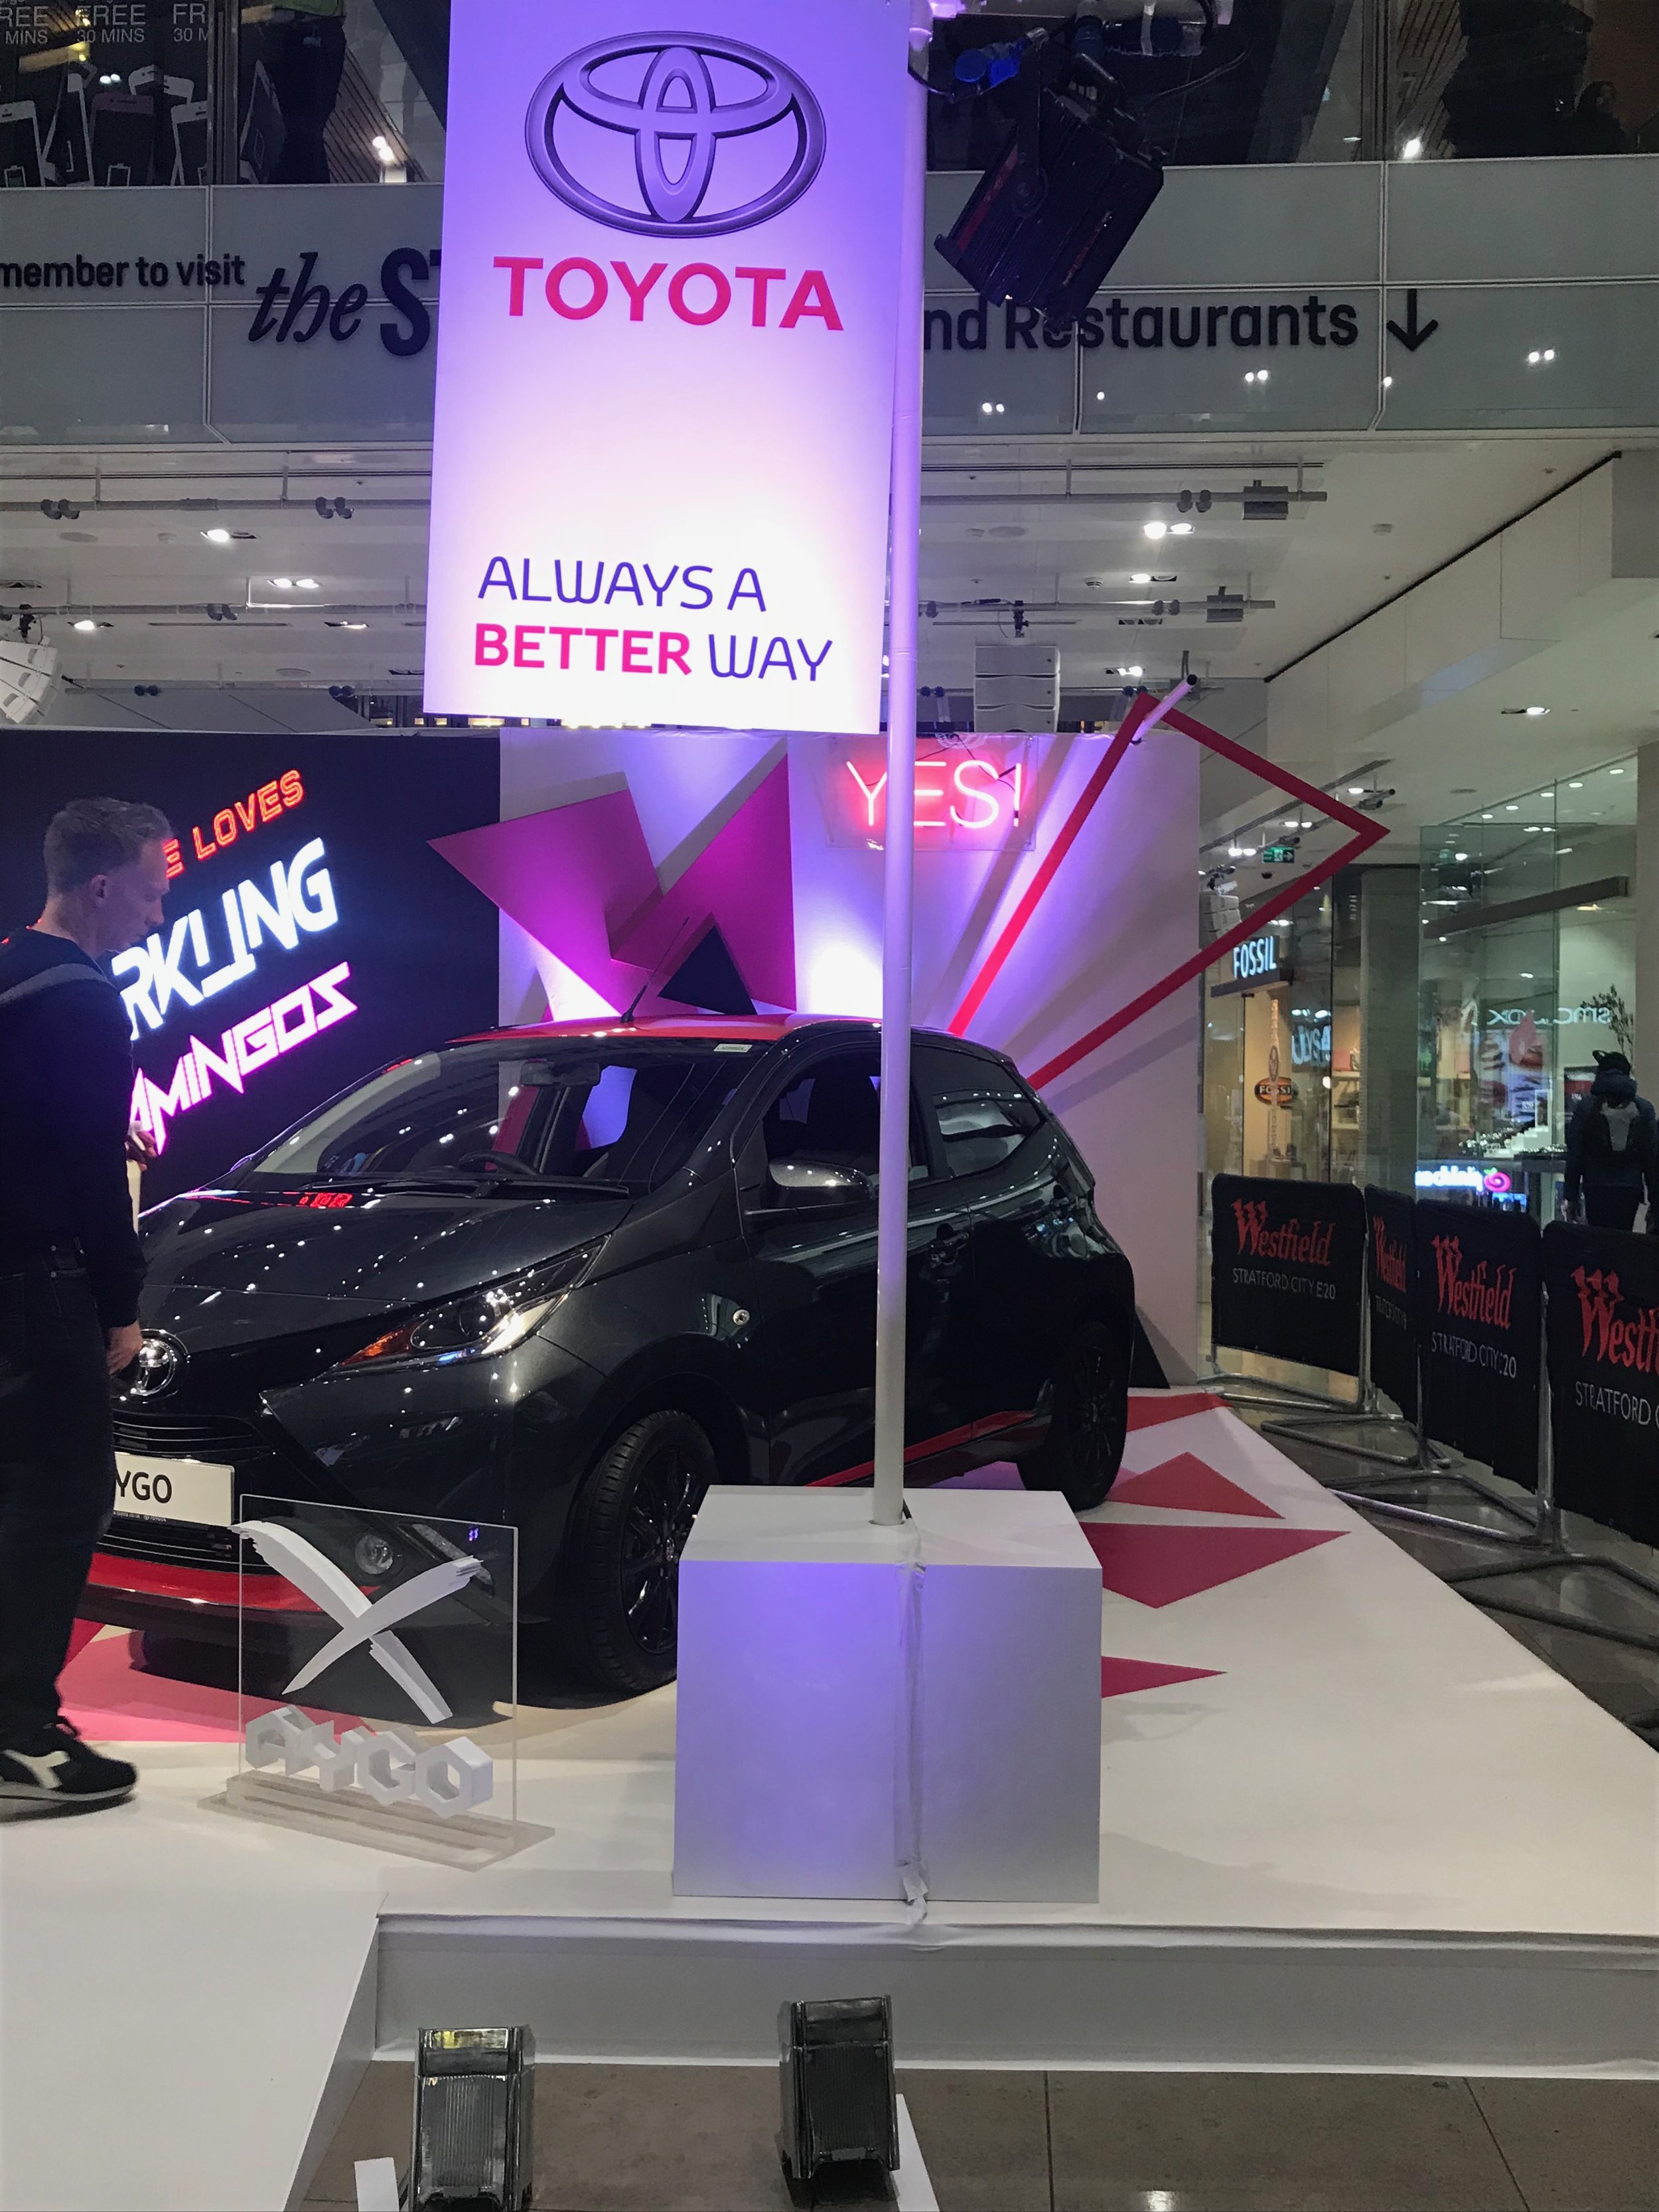 Toyota car with pink triangles and white lights.